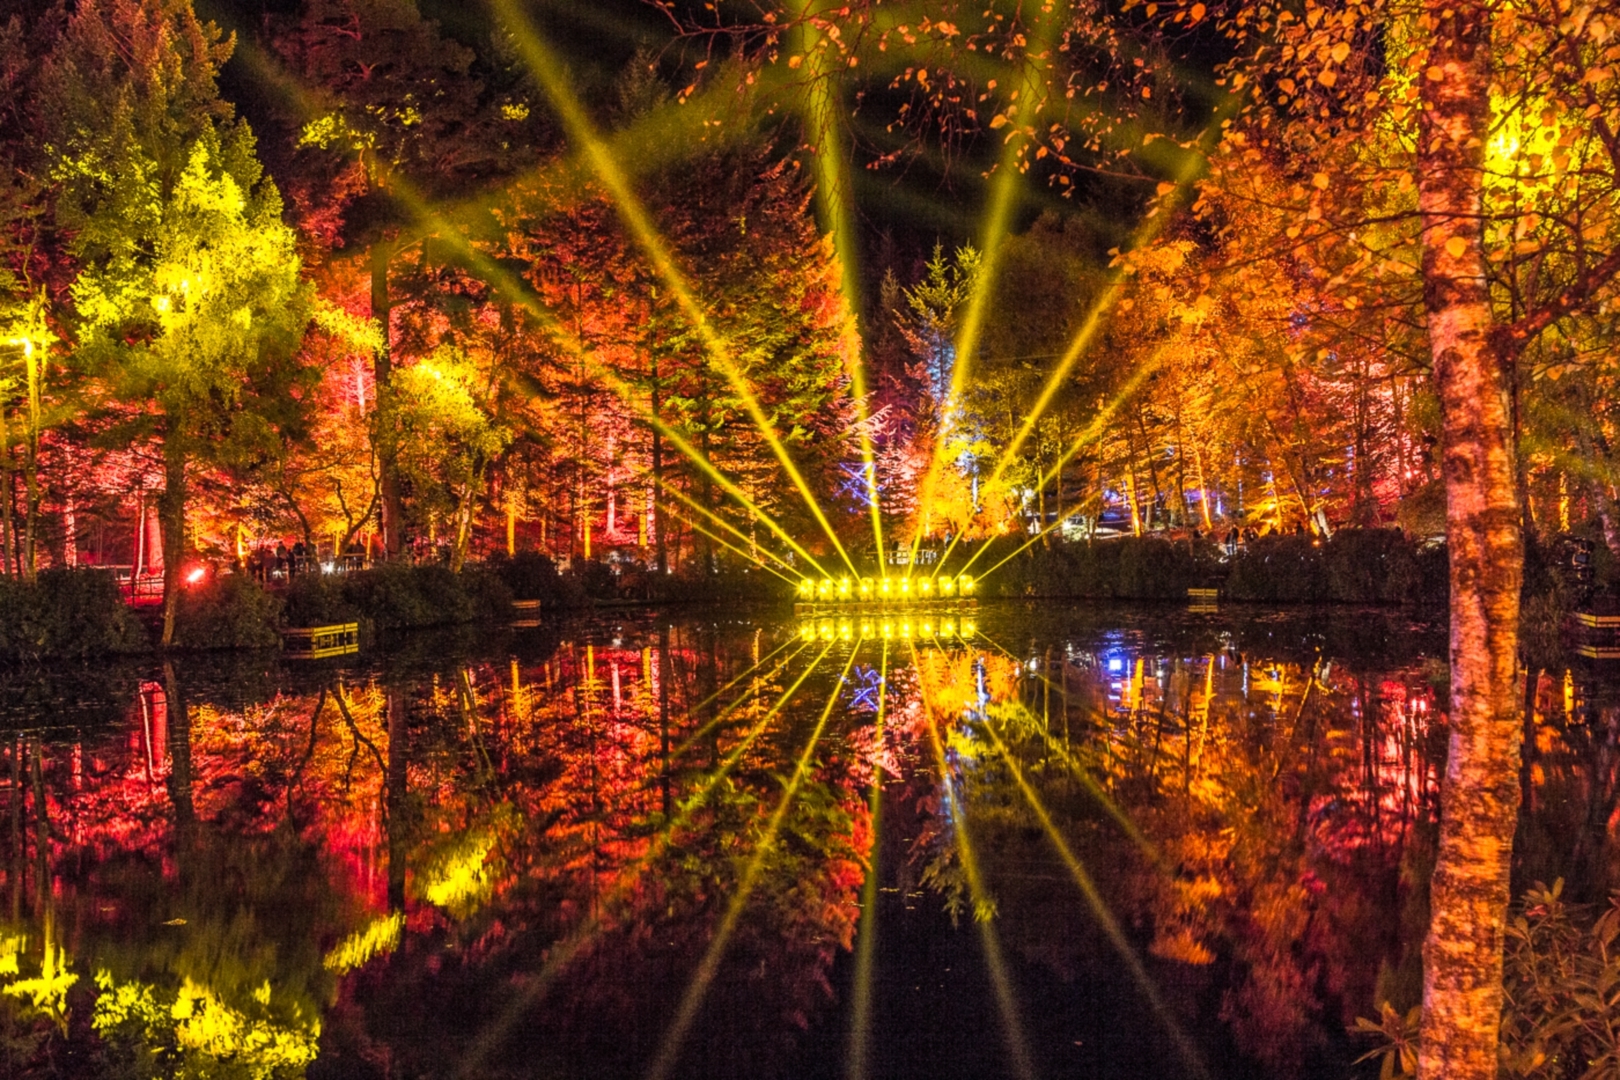 The Enchanted Forest is a feast for all the senses.